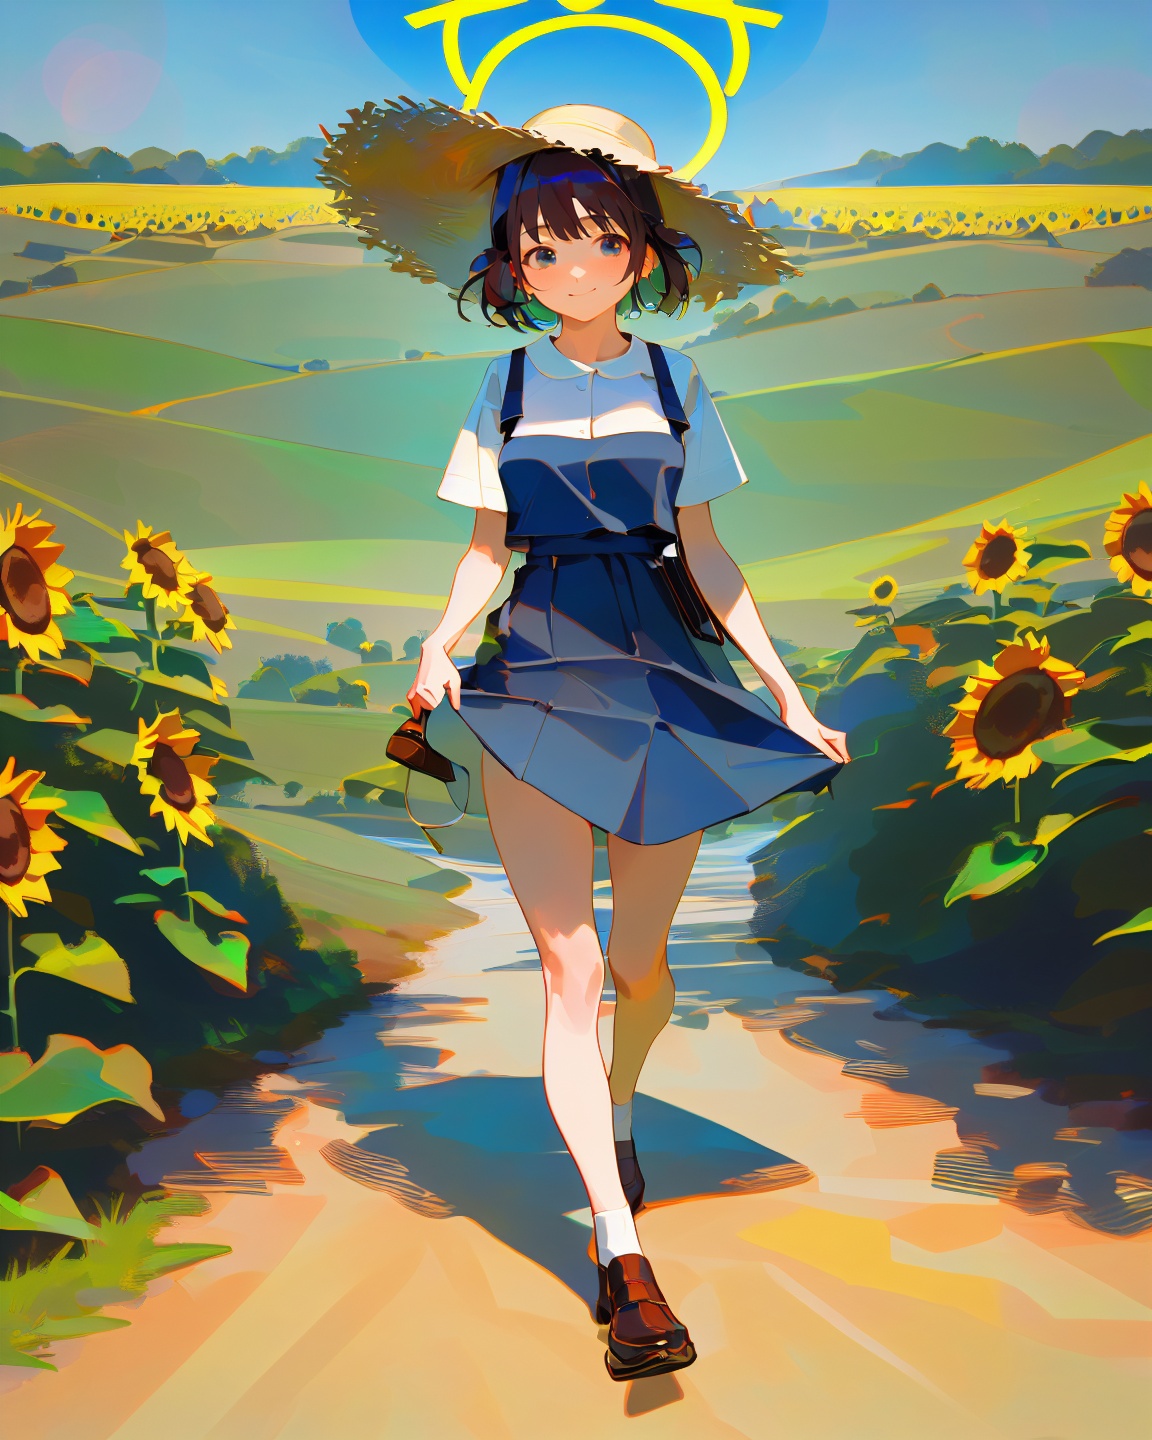 1 girl +looking at viewer+ short black hair ++ Masterpiece + solo + cute + sunflower field + straw hat + gardener uniform + full body image + standing + smile + lens halo + dusk,, masterpiece, best quality, masterpiece, best quality